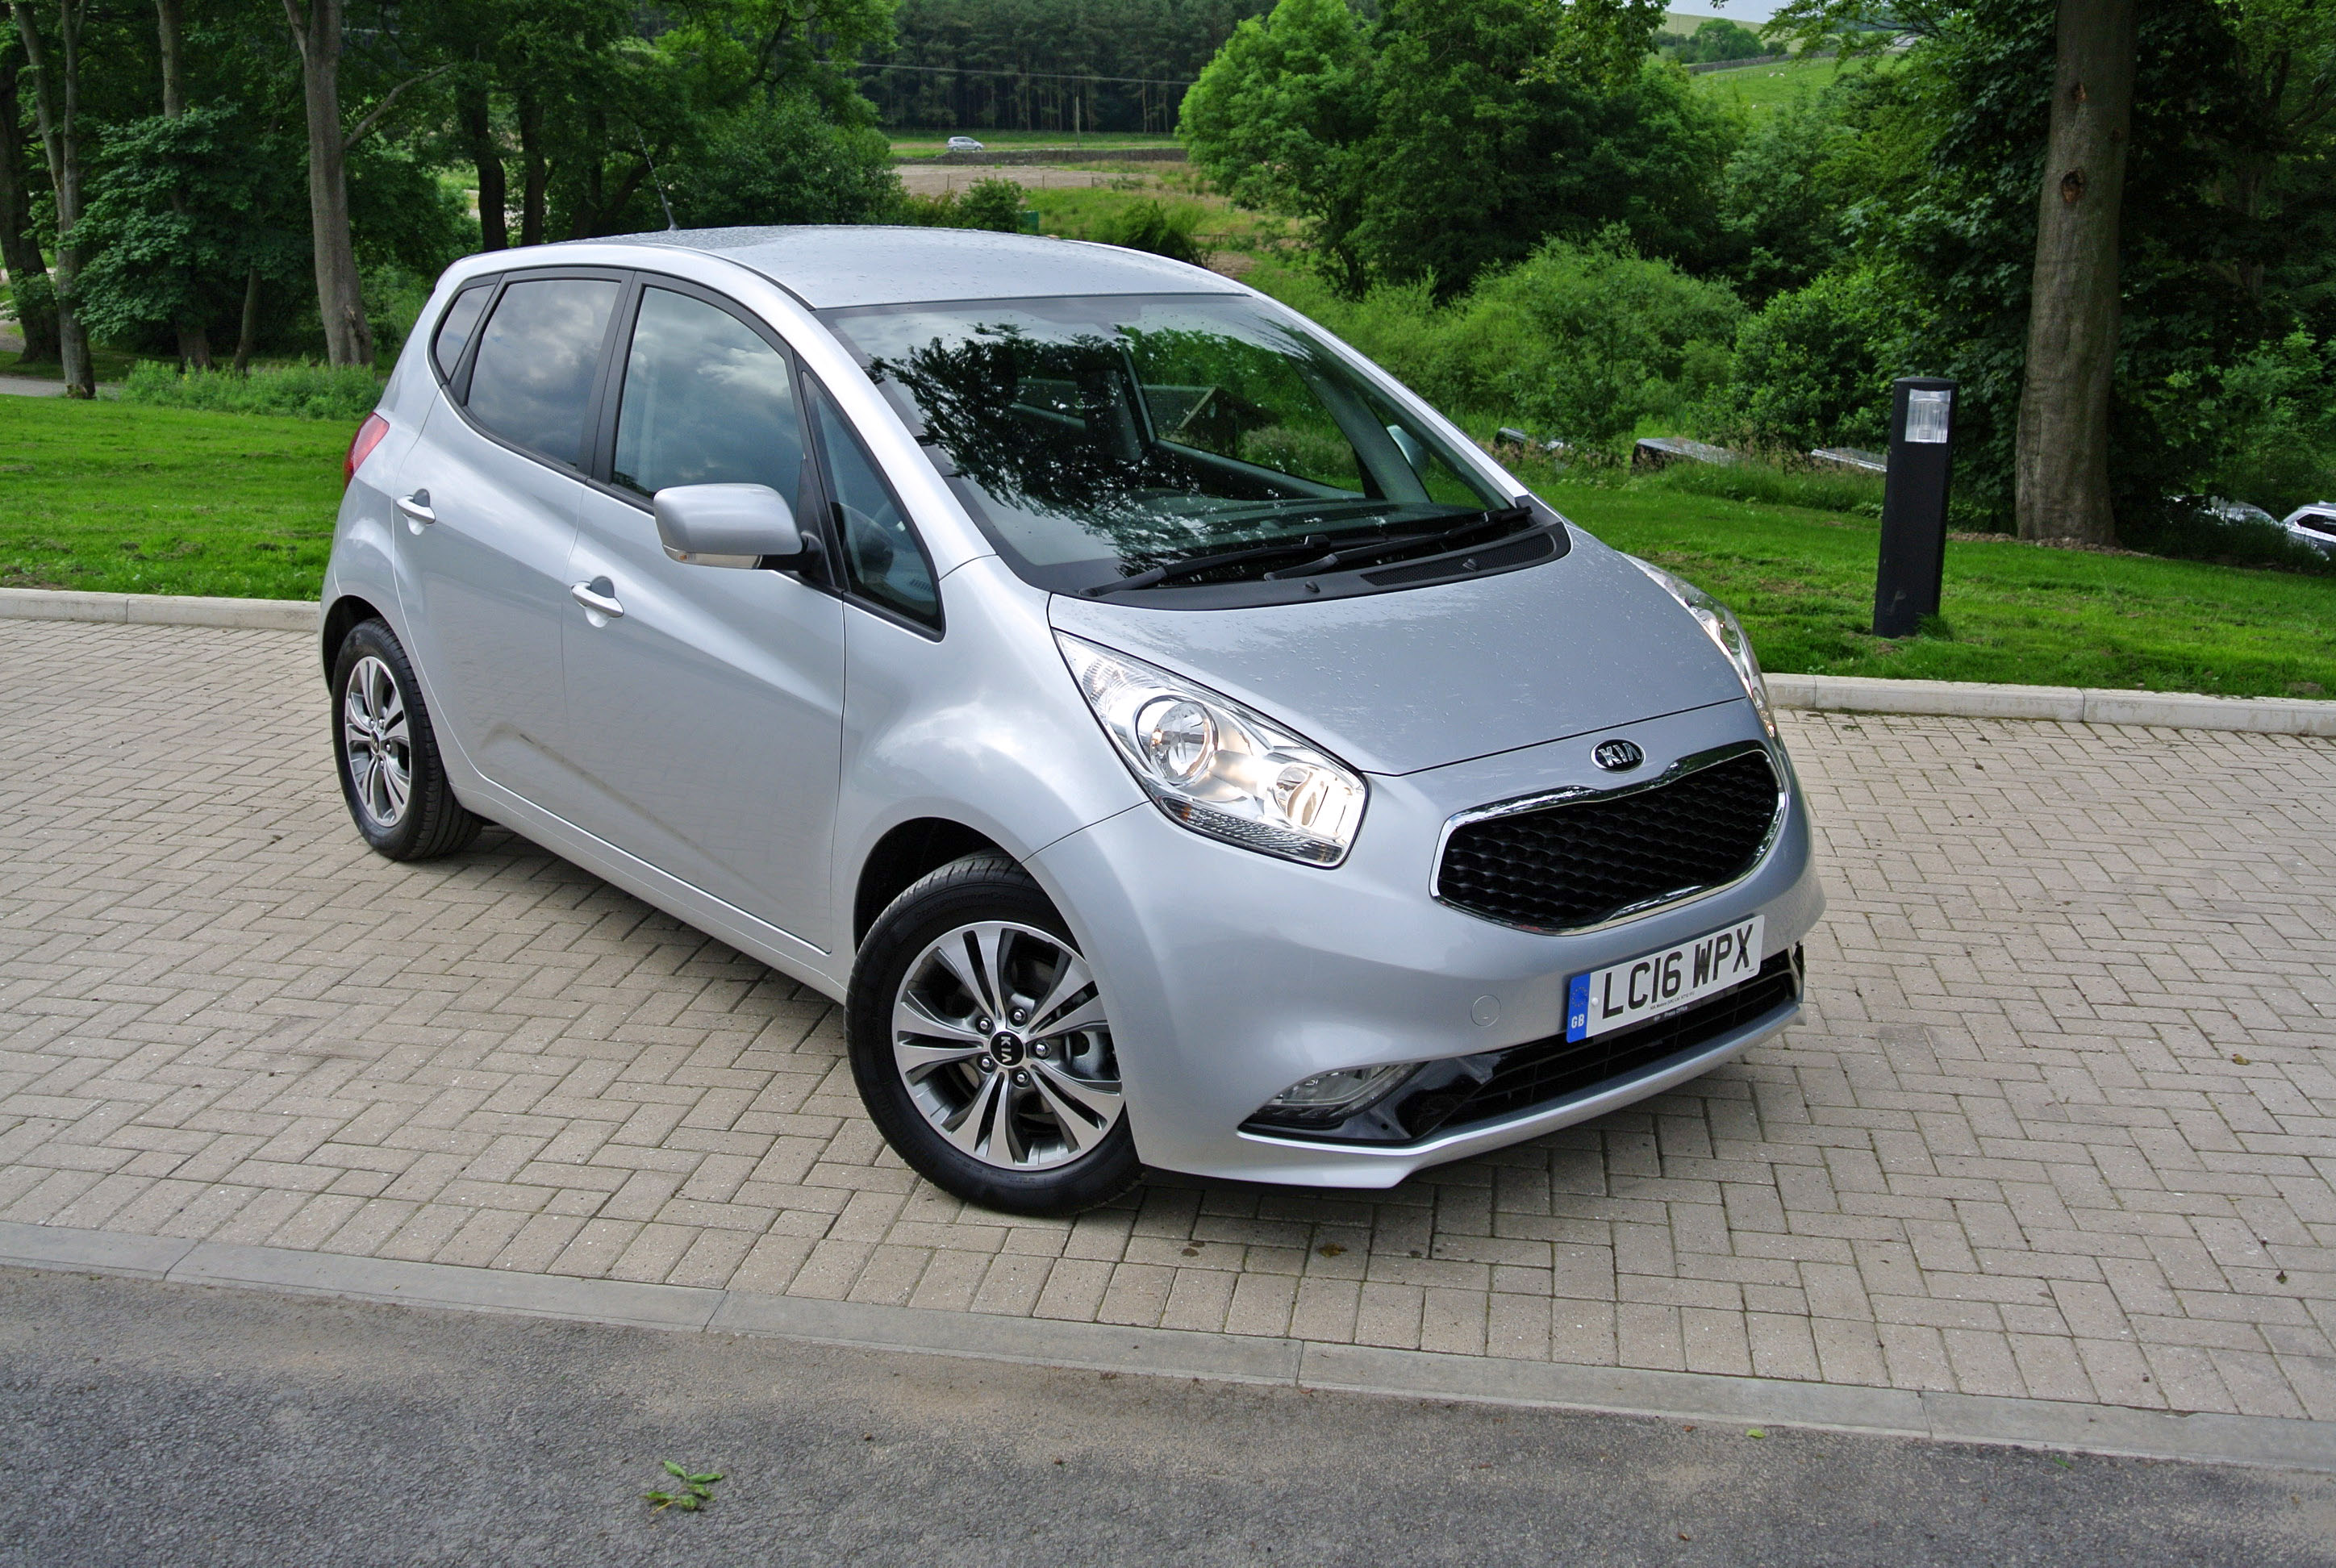 ‘Blue Badge’ is Kia’s unintentional target with the Venga